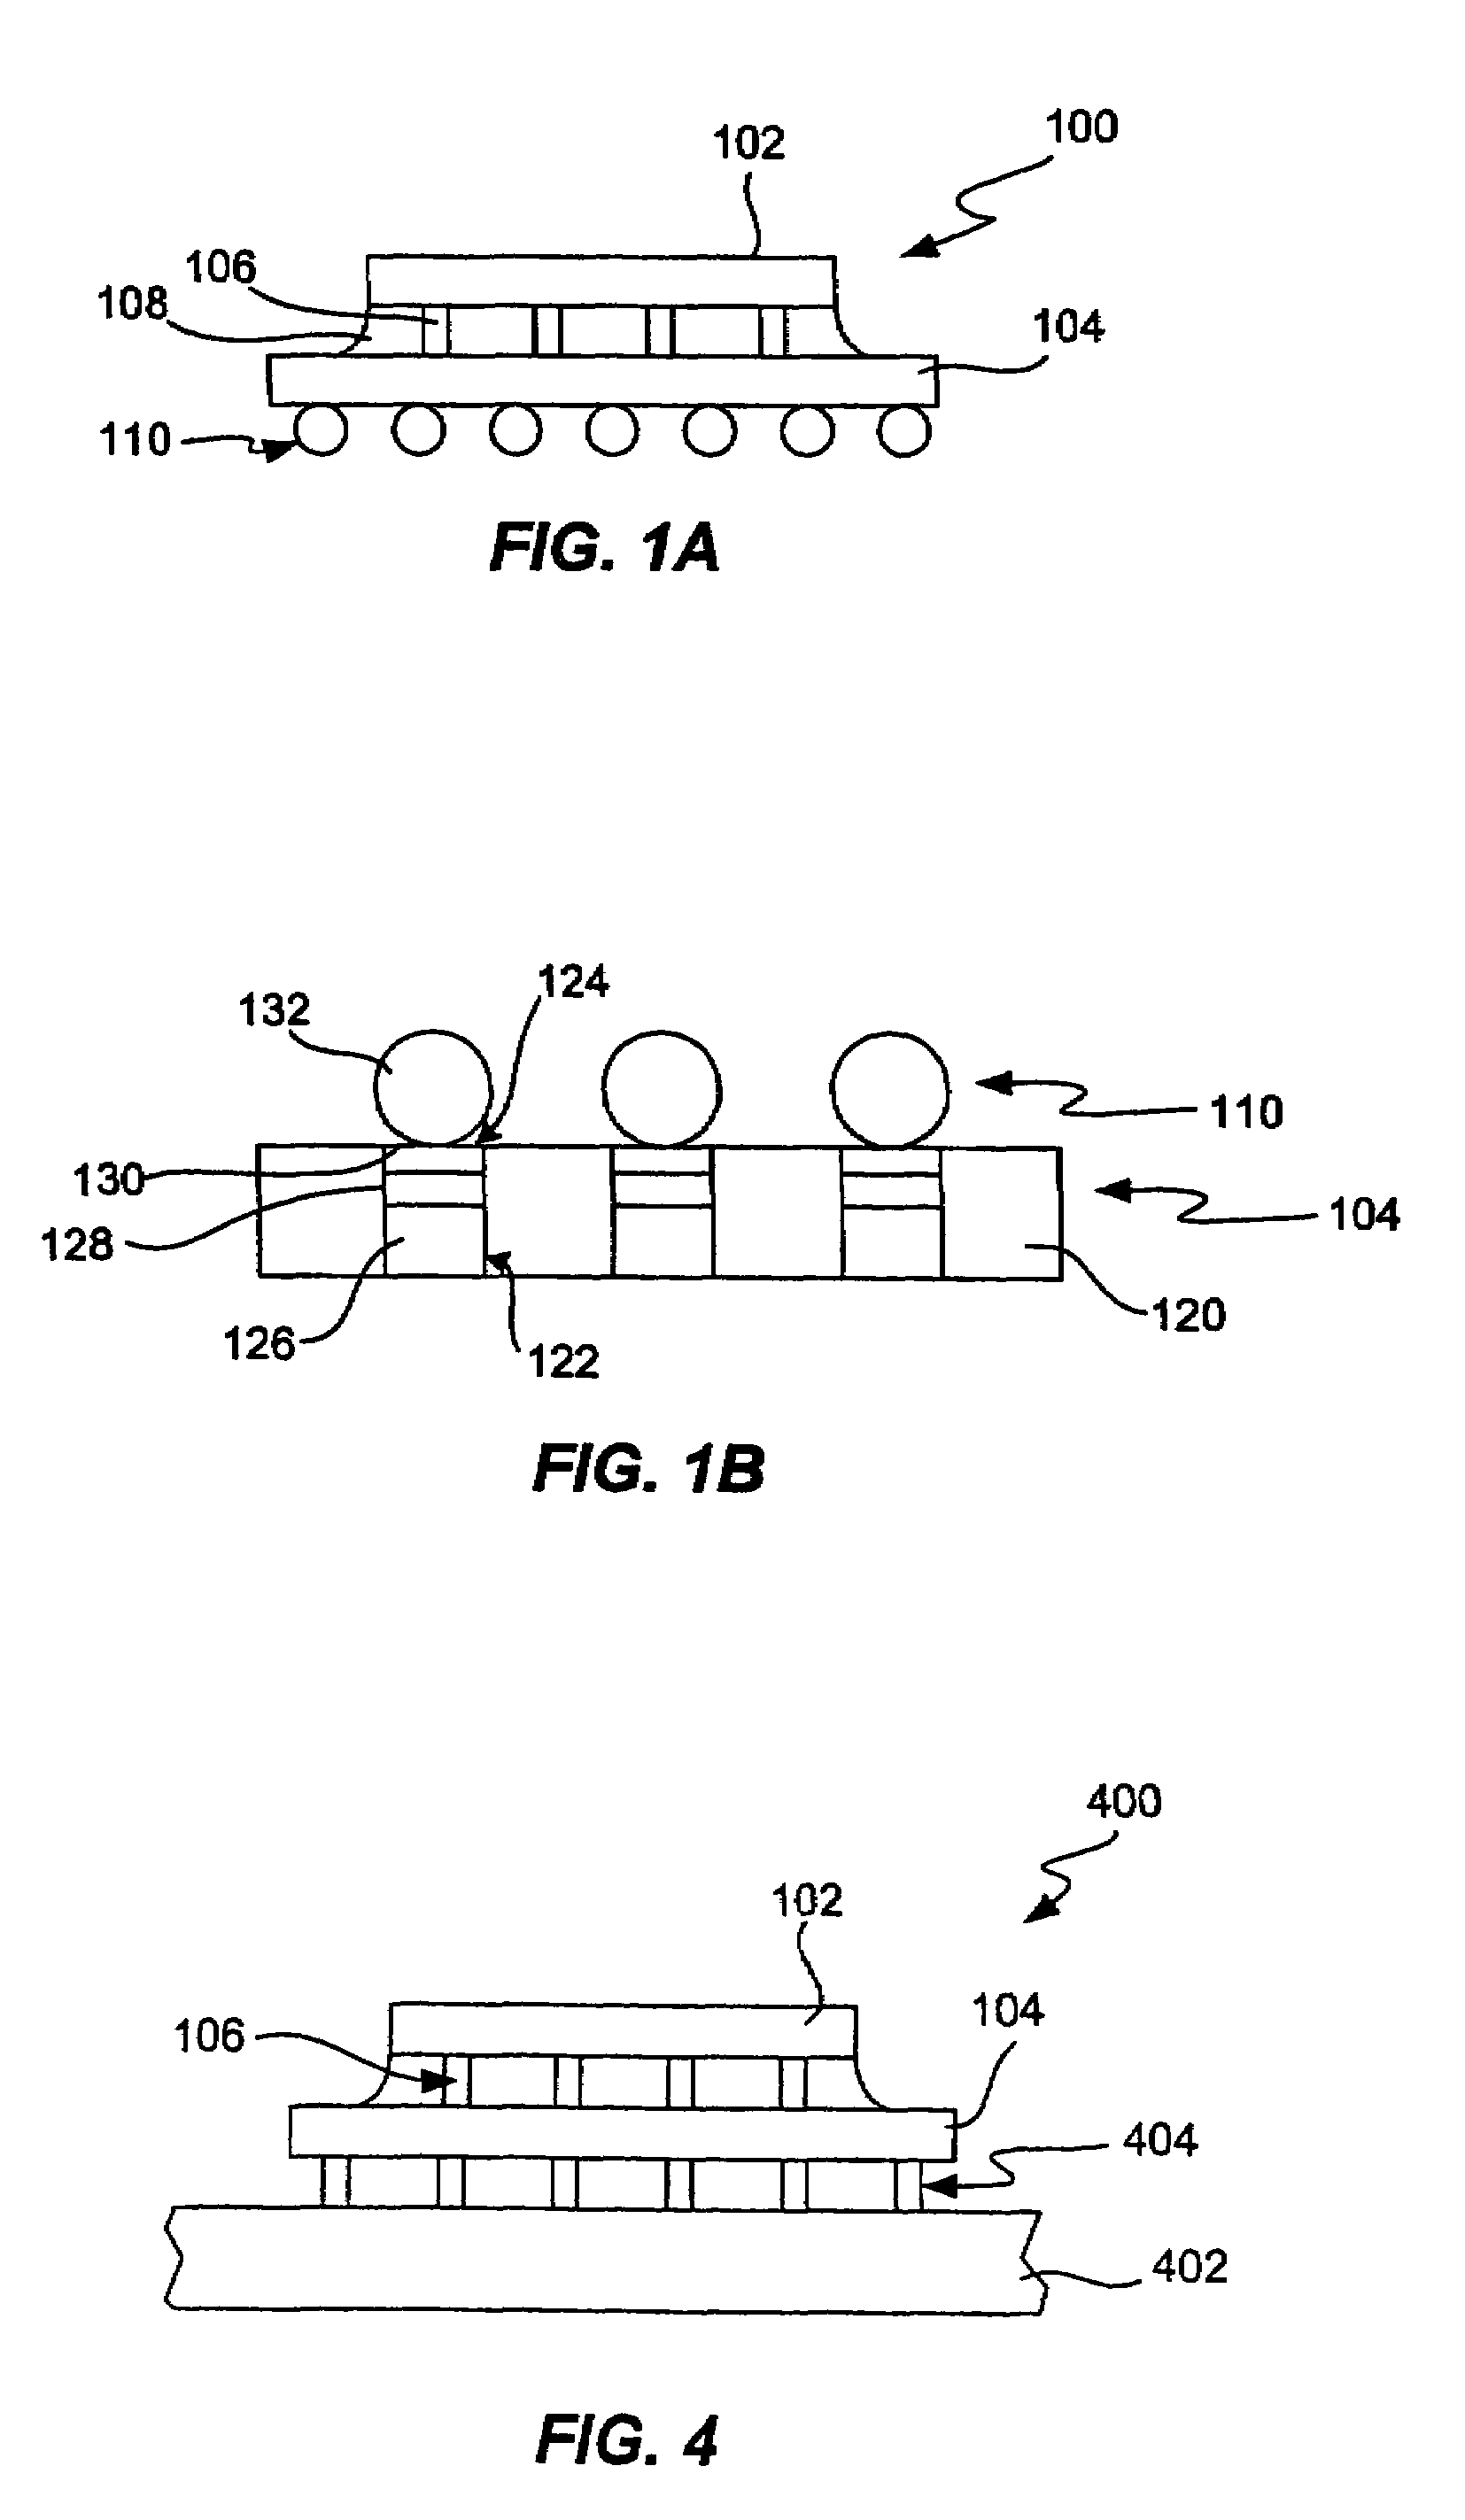 Method of mounting an electroless nickel immersion gold flip chip package